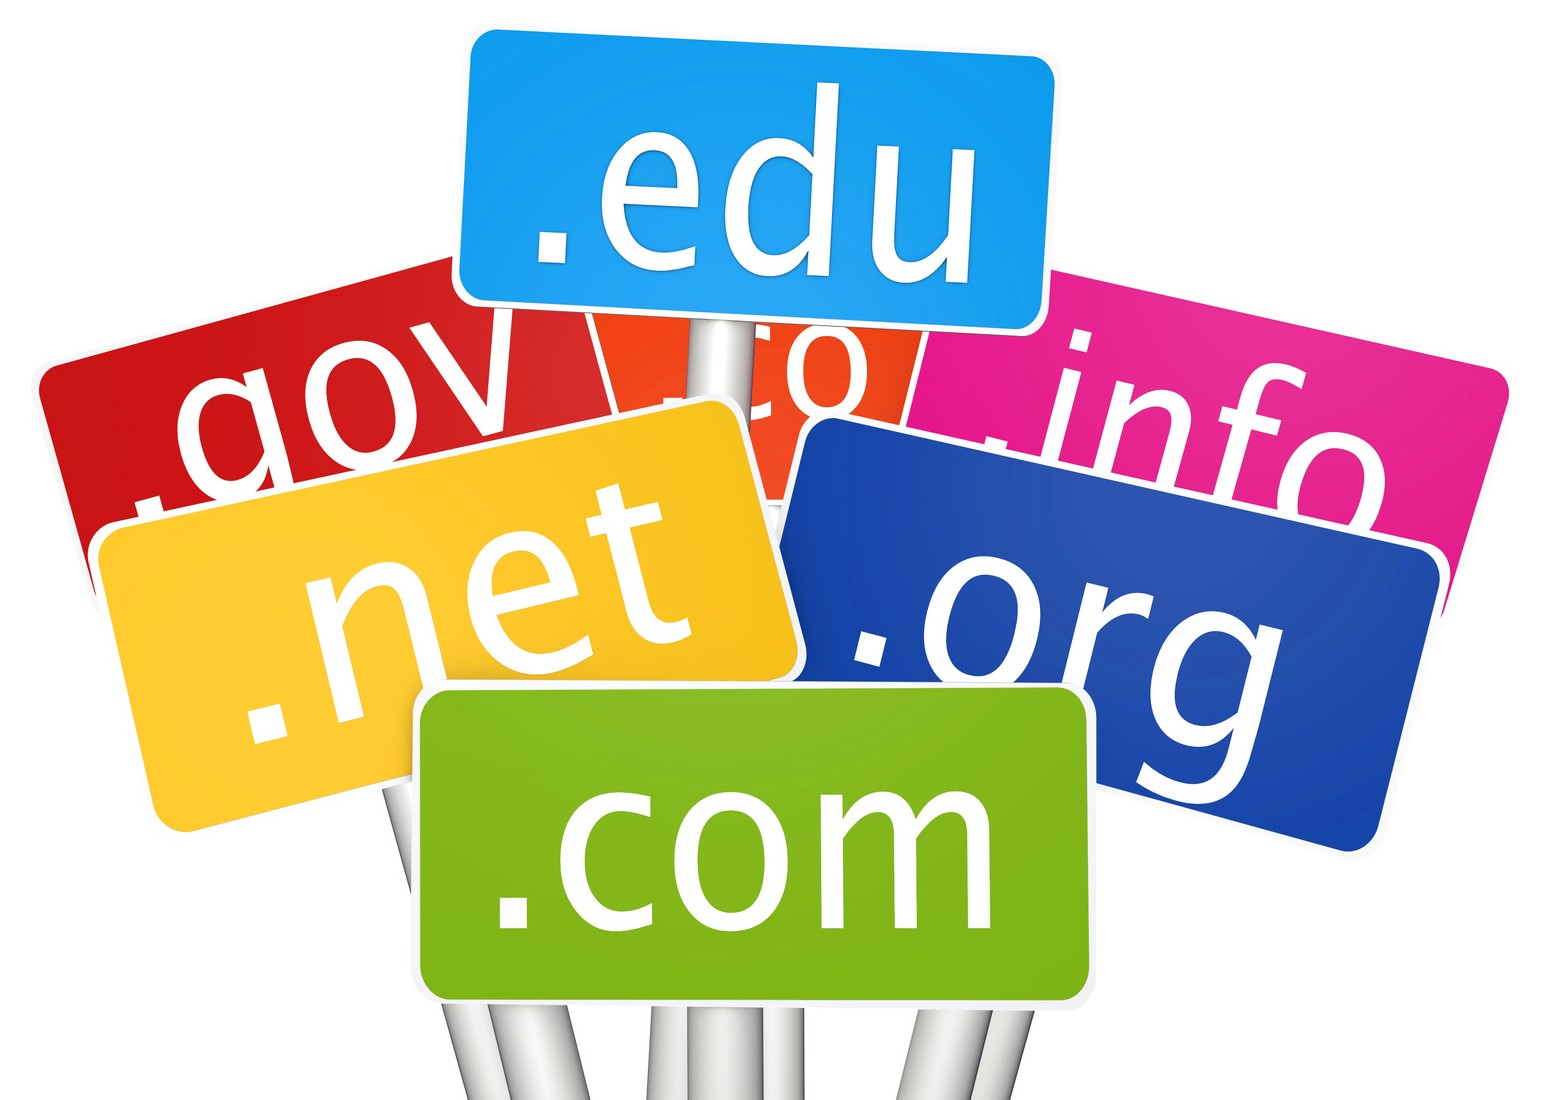 Set up your site with a .com domain, and make it more powerful